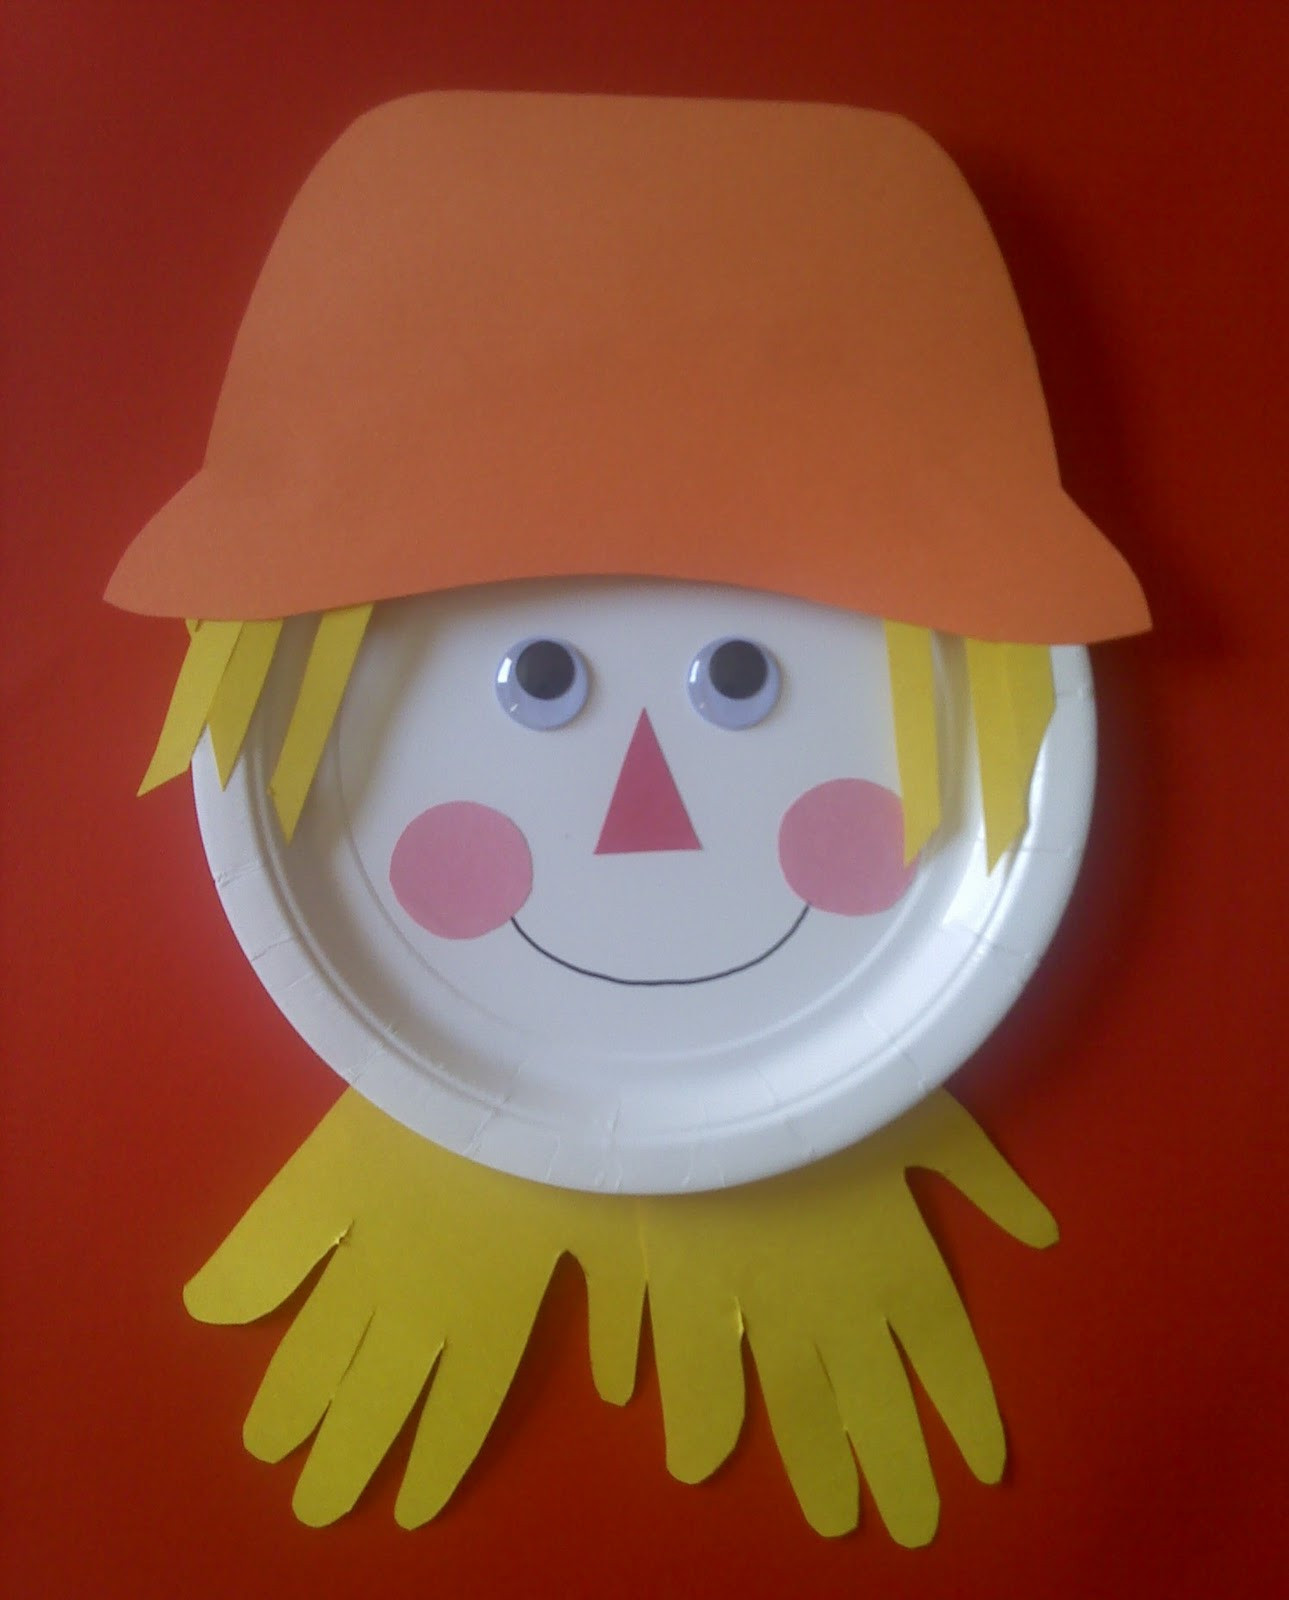 Fall Craft Ideas For Preschoolers
 Crafts For Preschoolers Fall Crafts Cooking